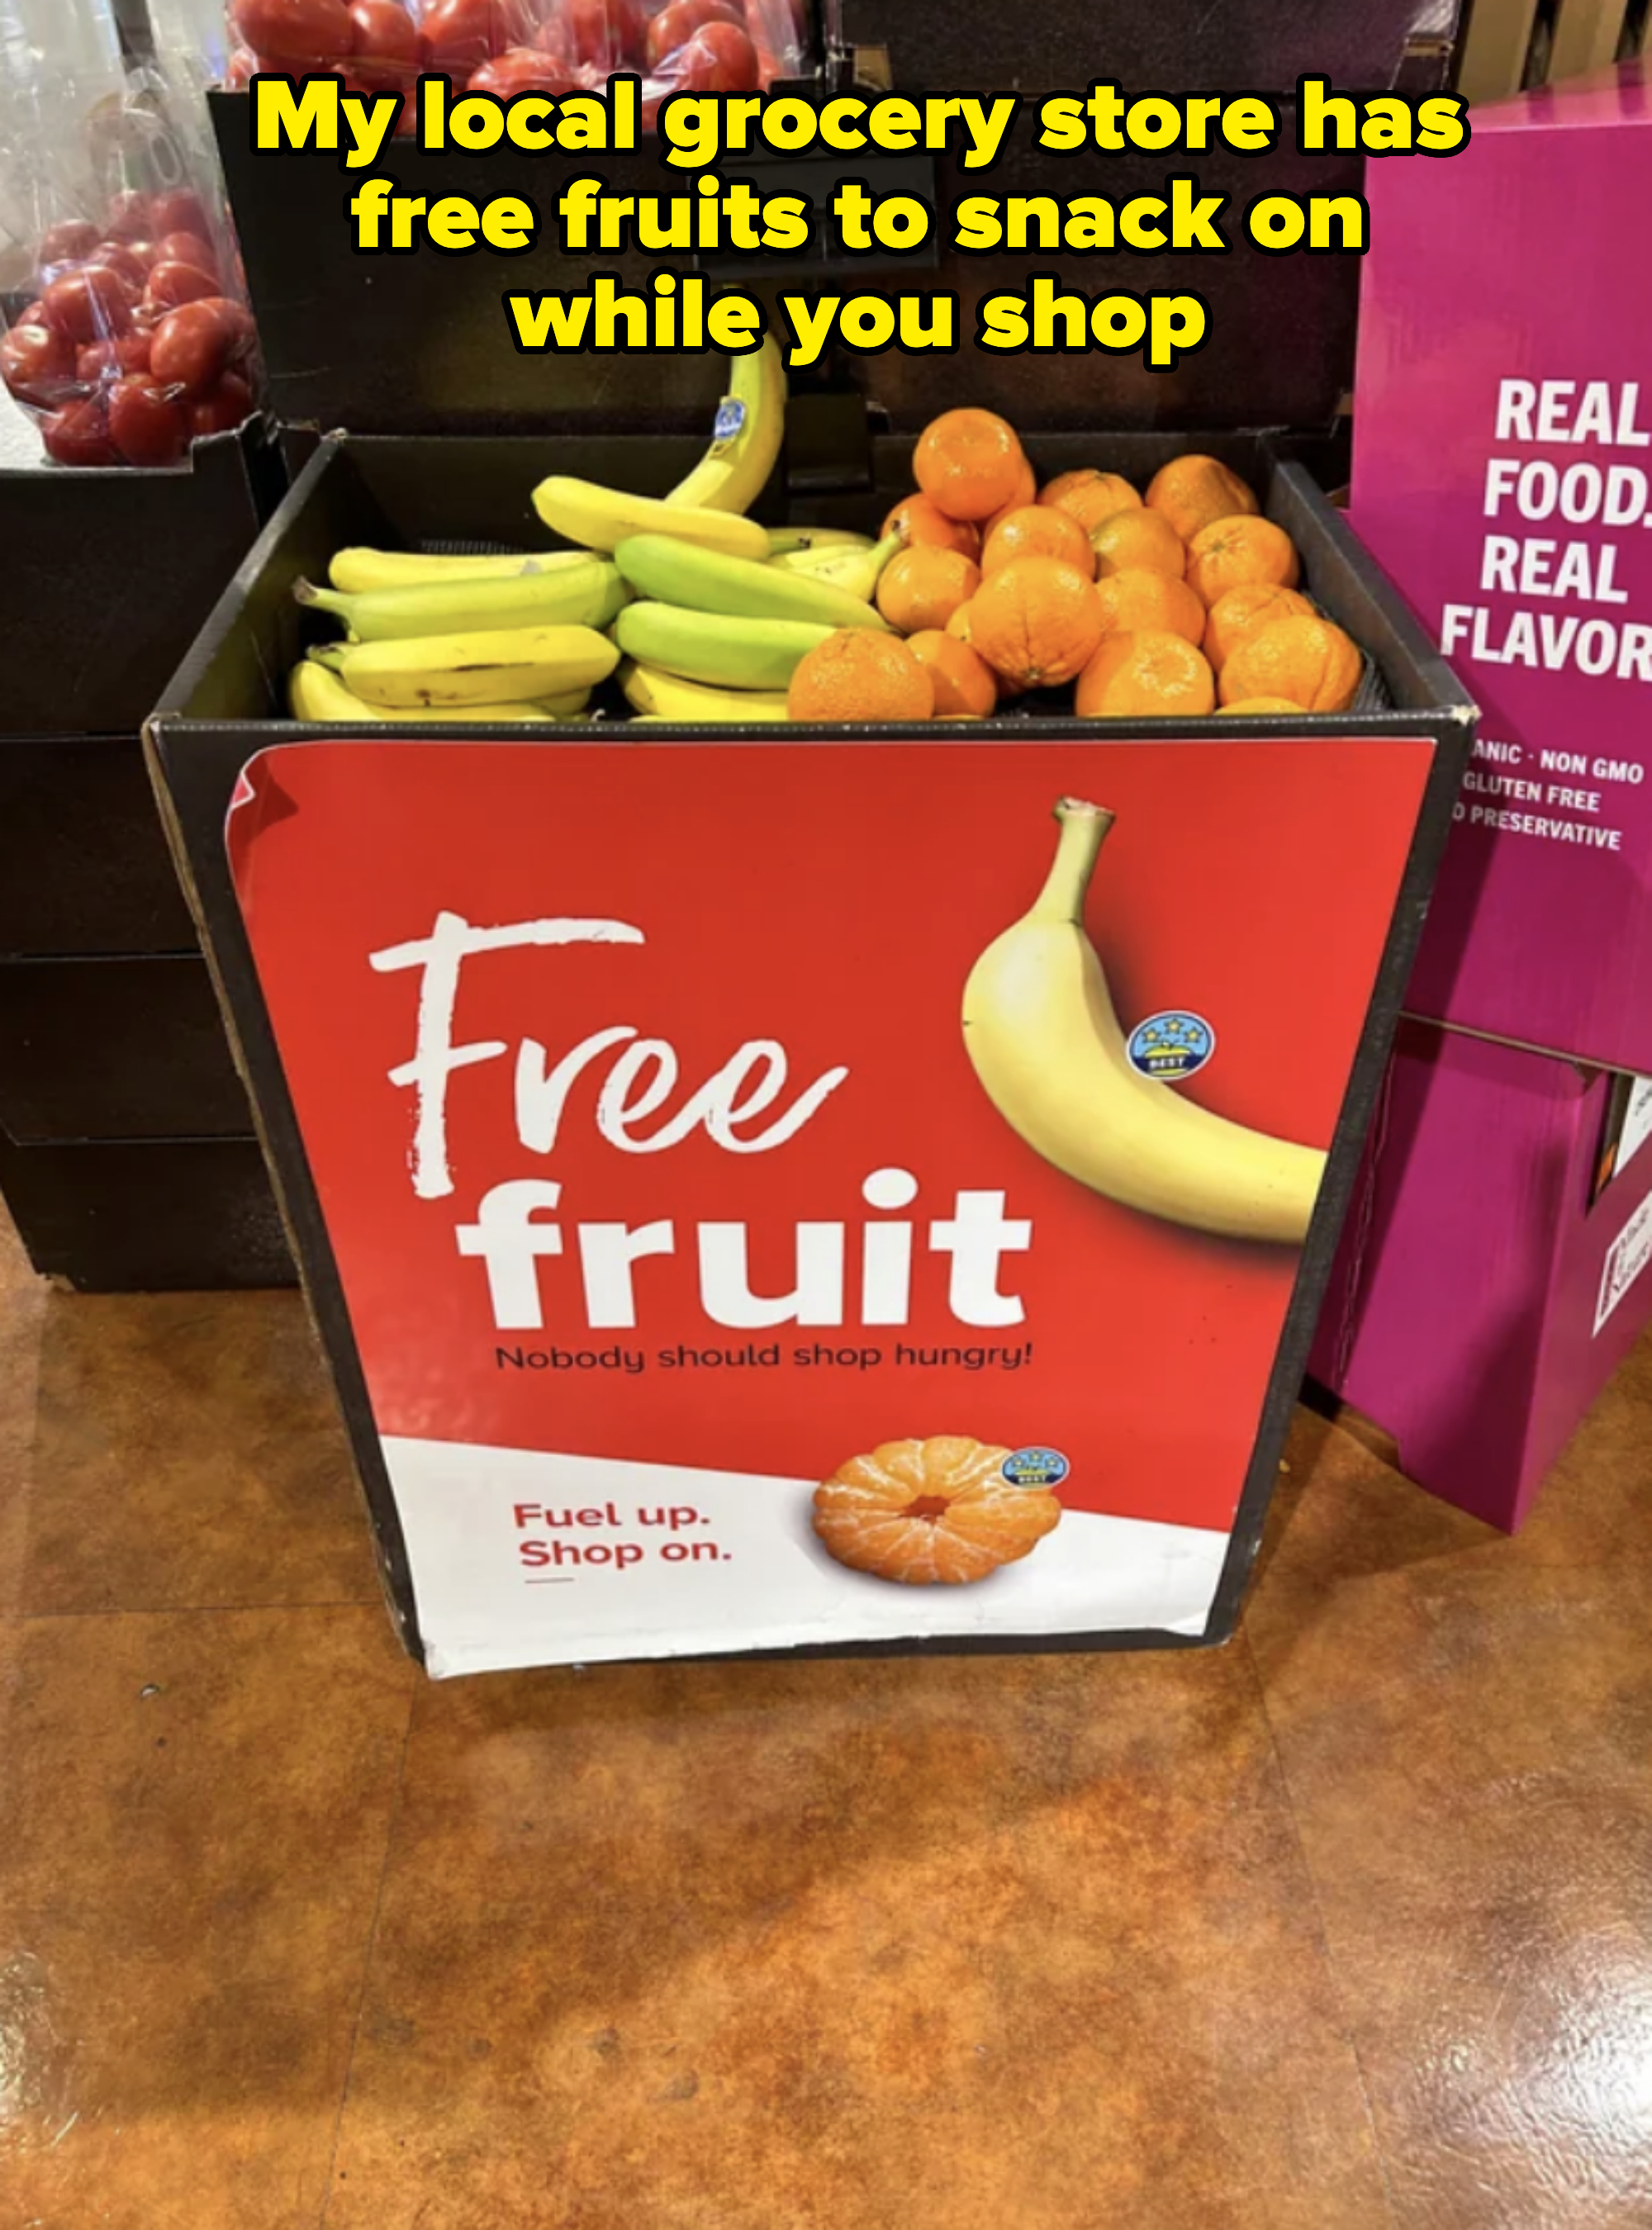 Sign at a store offering &#x27;Free fruit&#x27; with the text &#x27;Nobody should shop hungry! Fuel up. Shop on.&#x27; Bananas and oranges are pictured